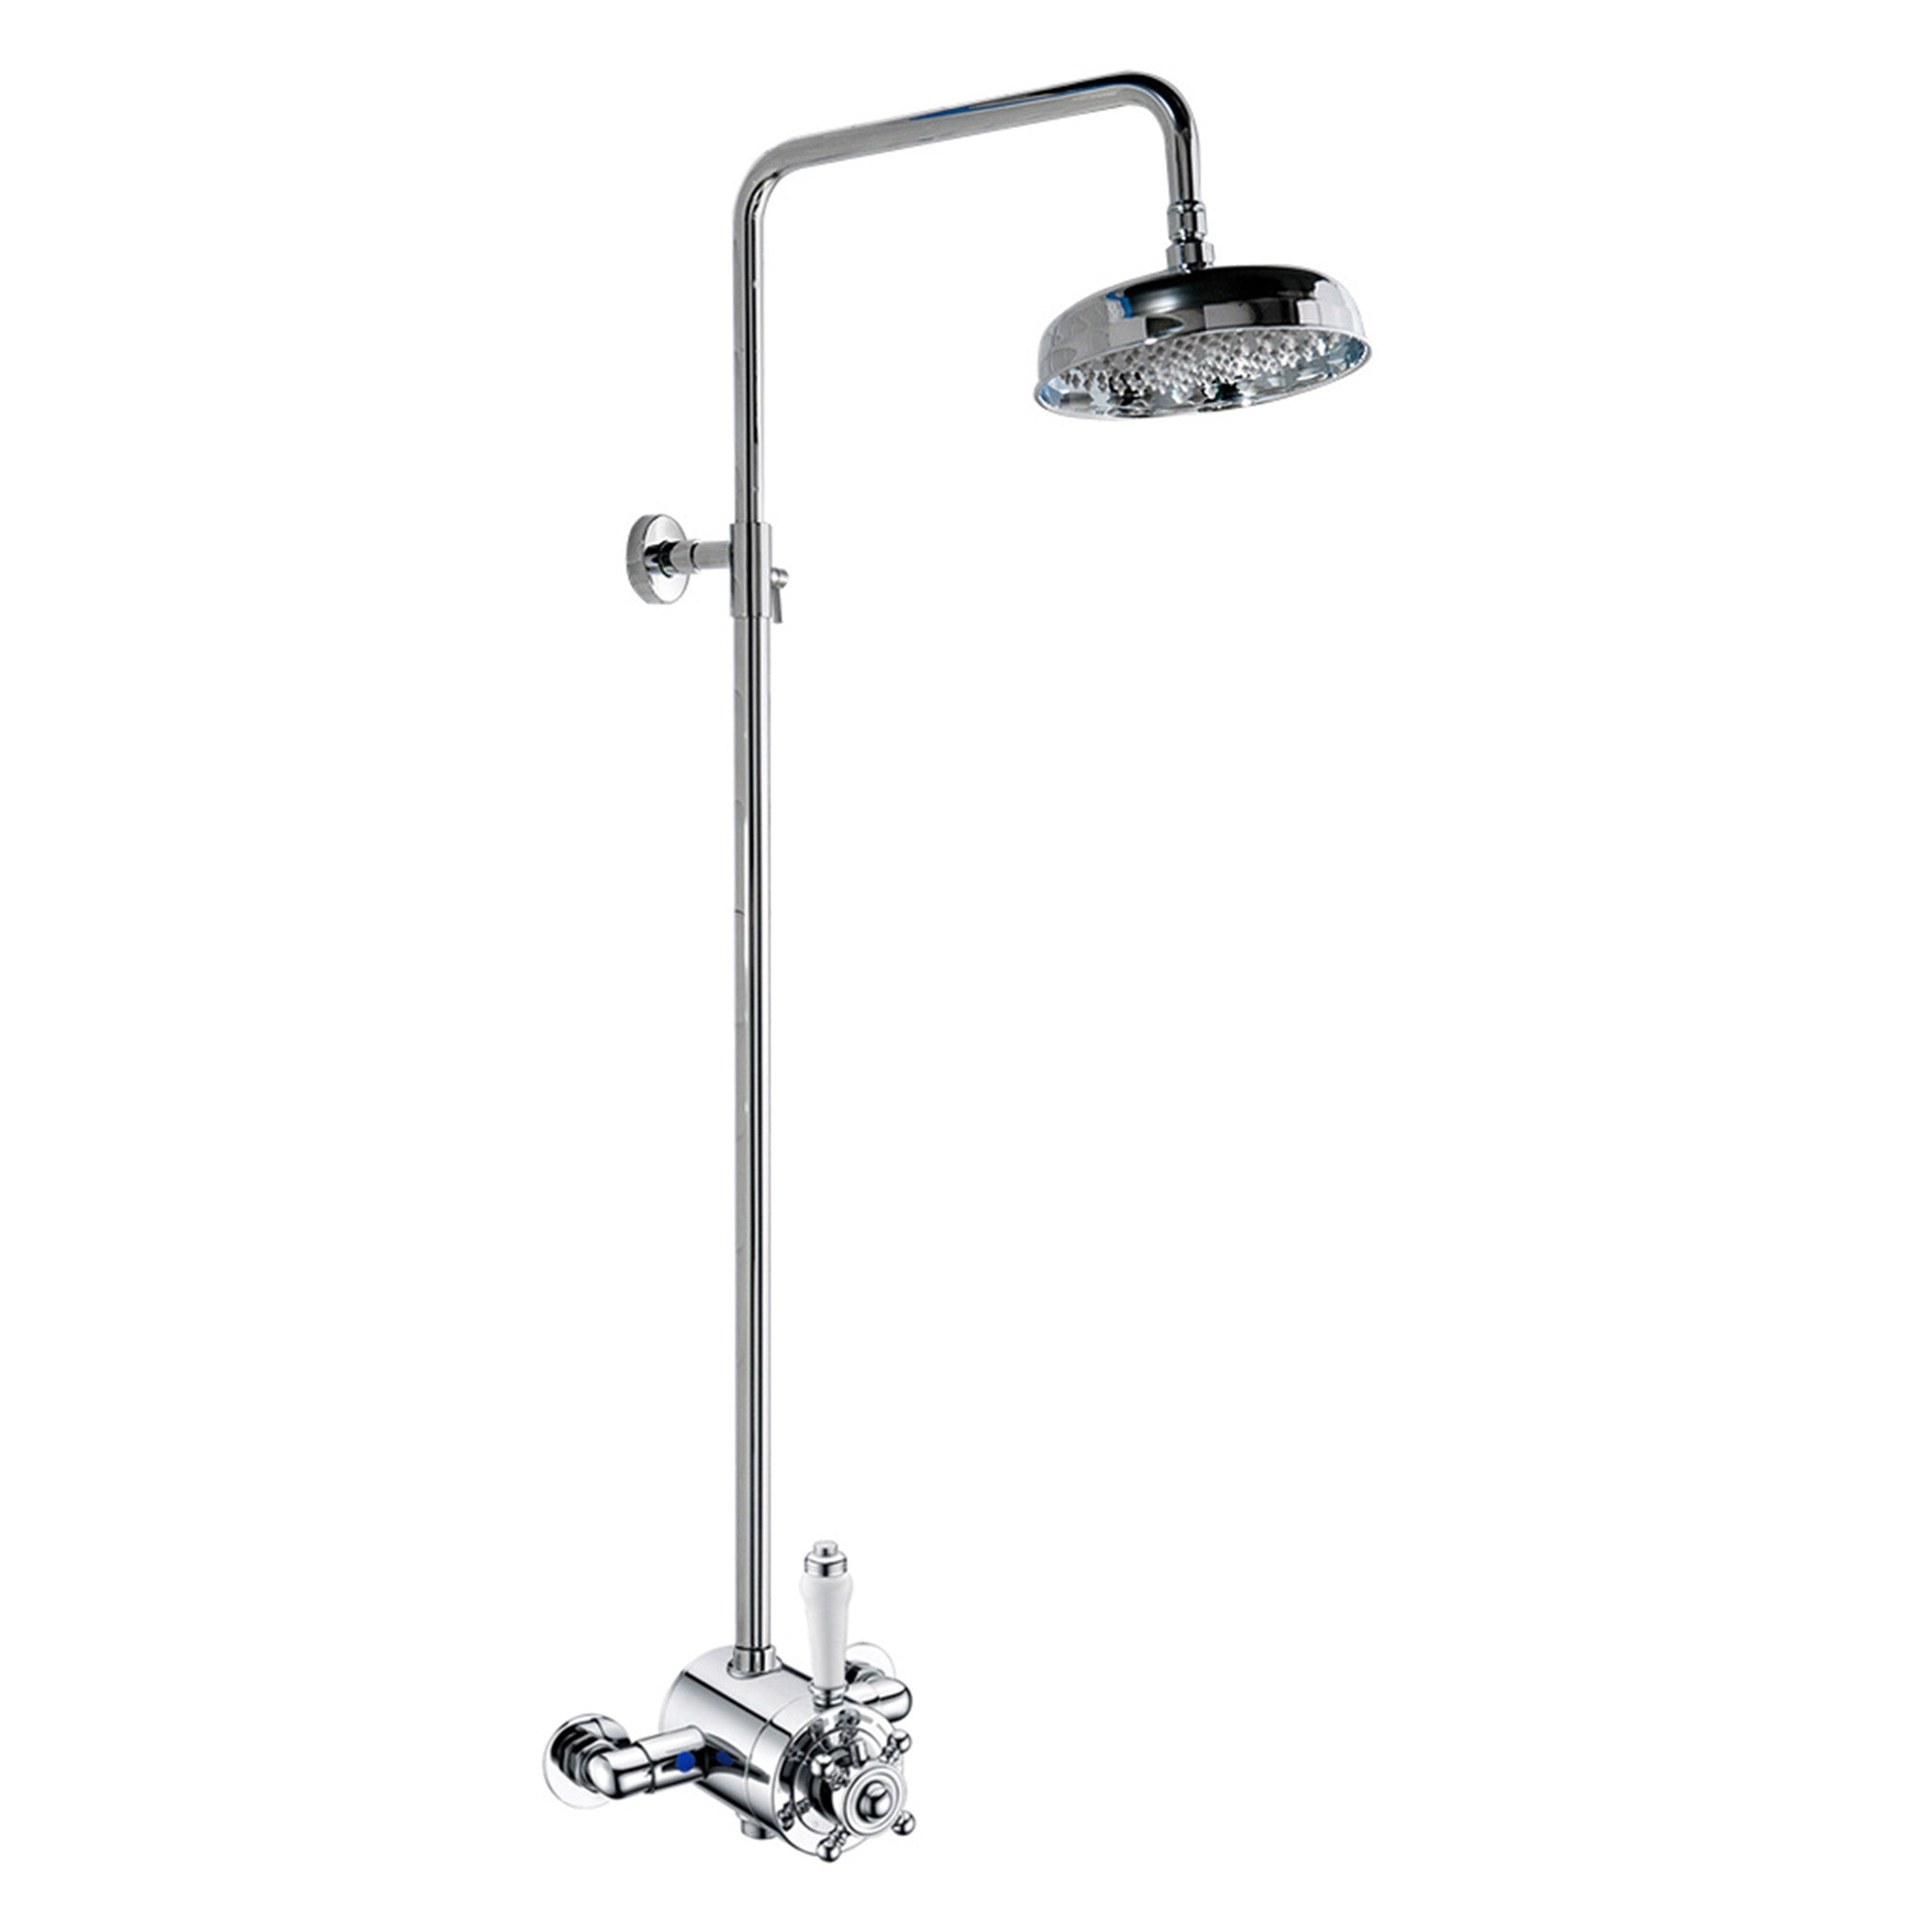 Union Exposed Shower System 7